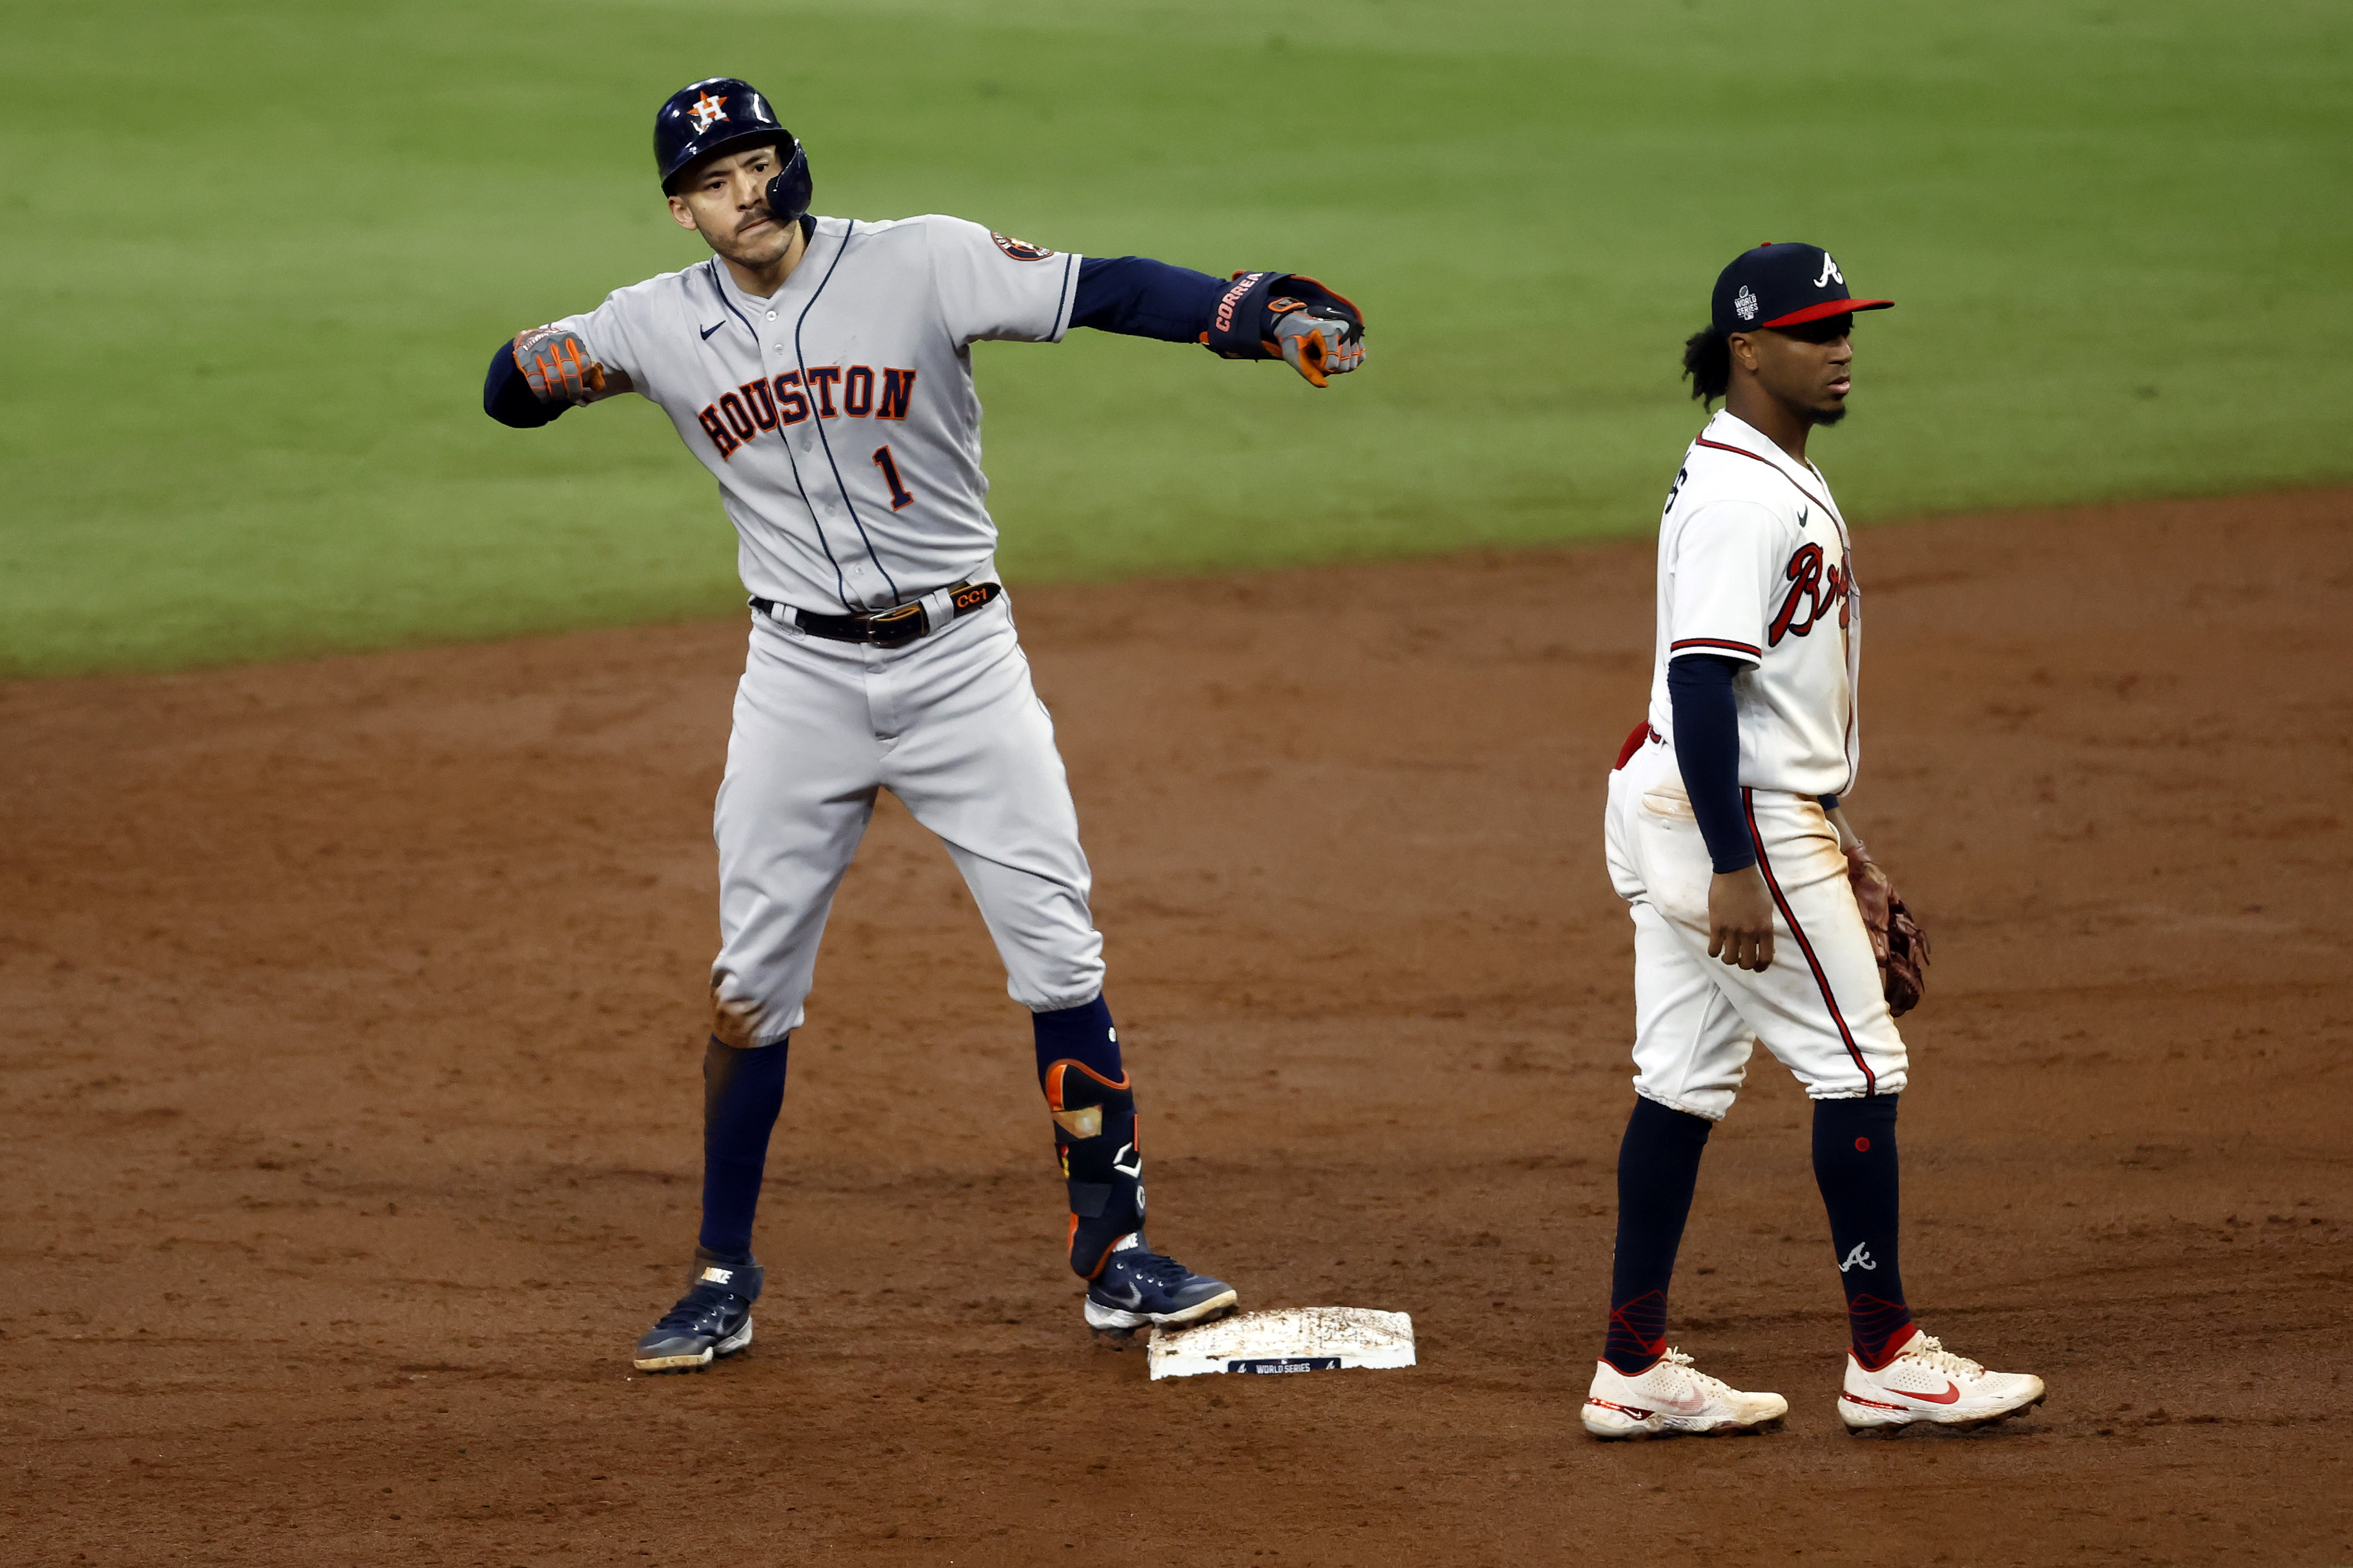 Chicago Cubs could be out on Carlos Correa after agent change